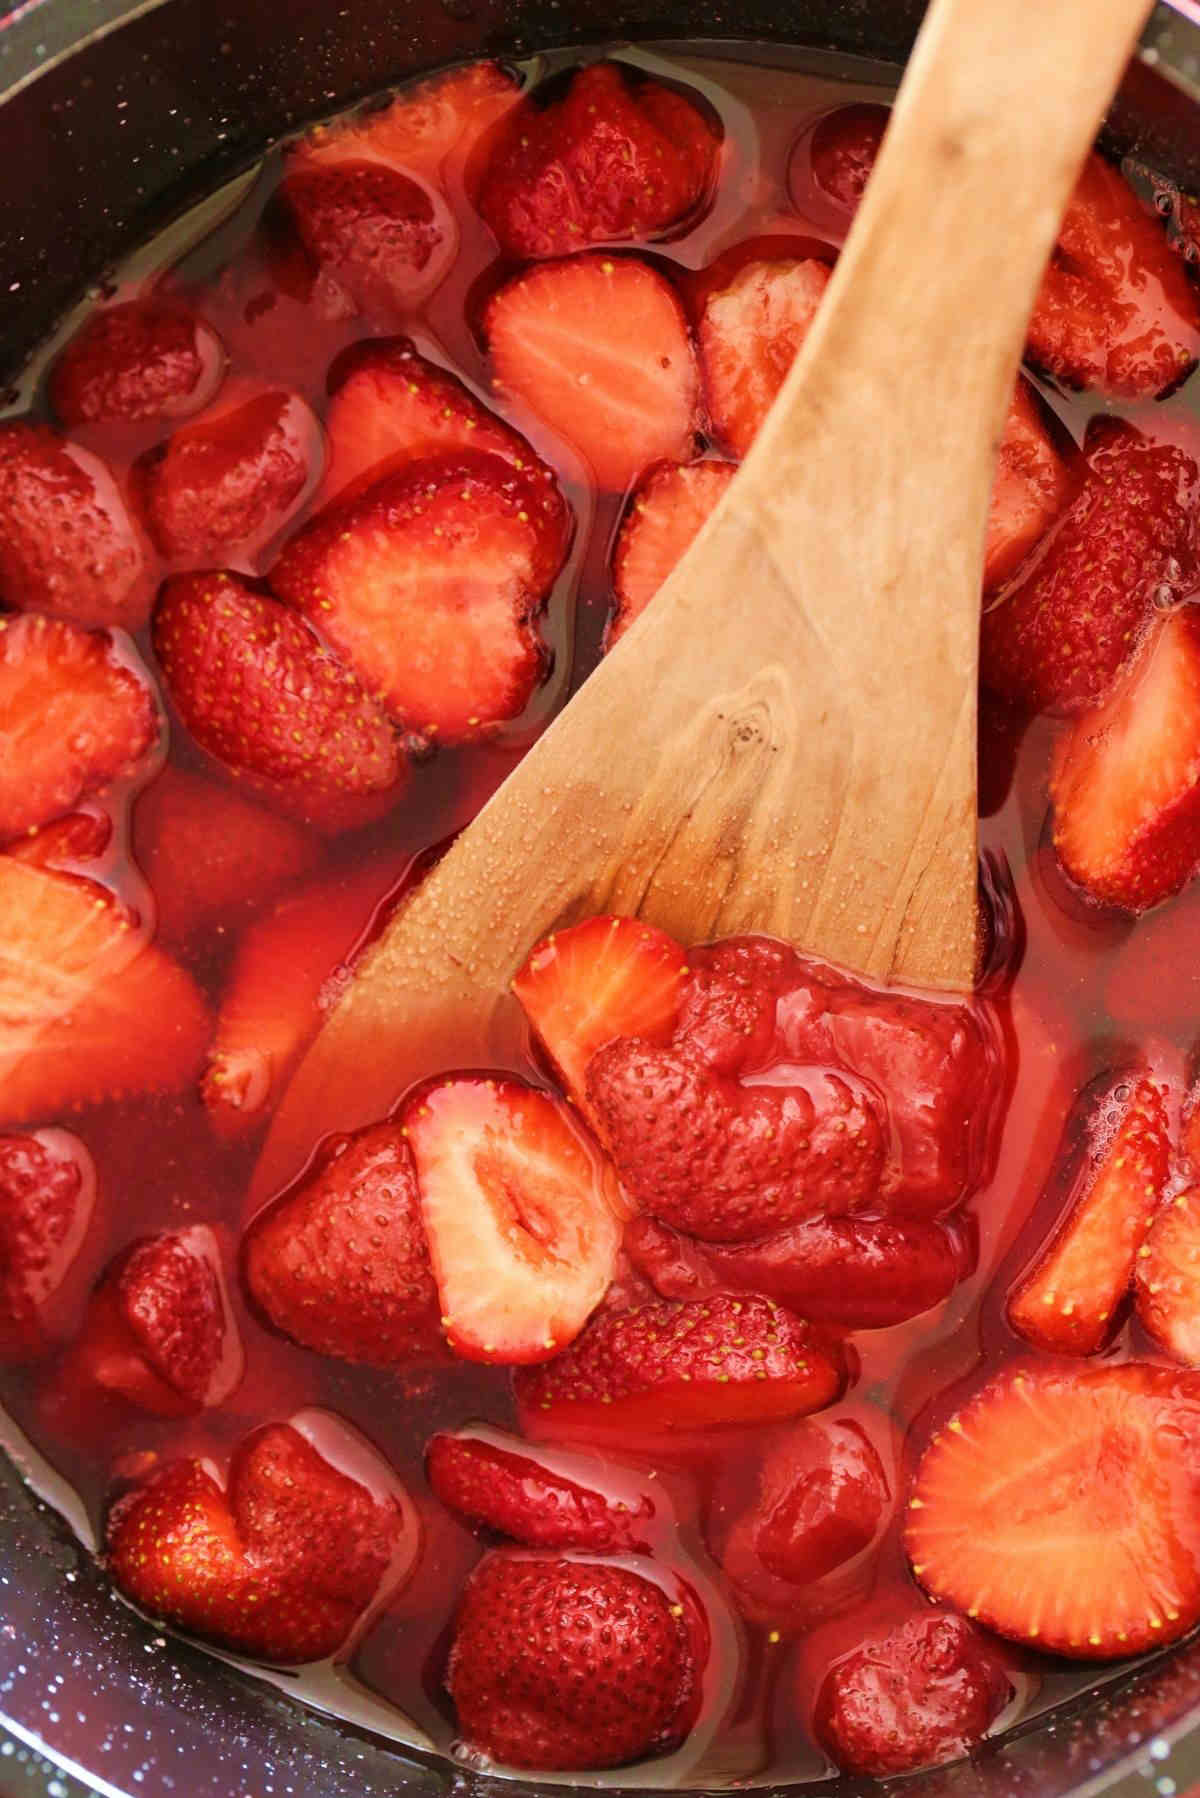 Cooked strawberries.